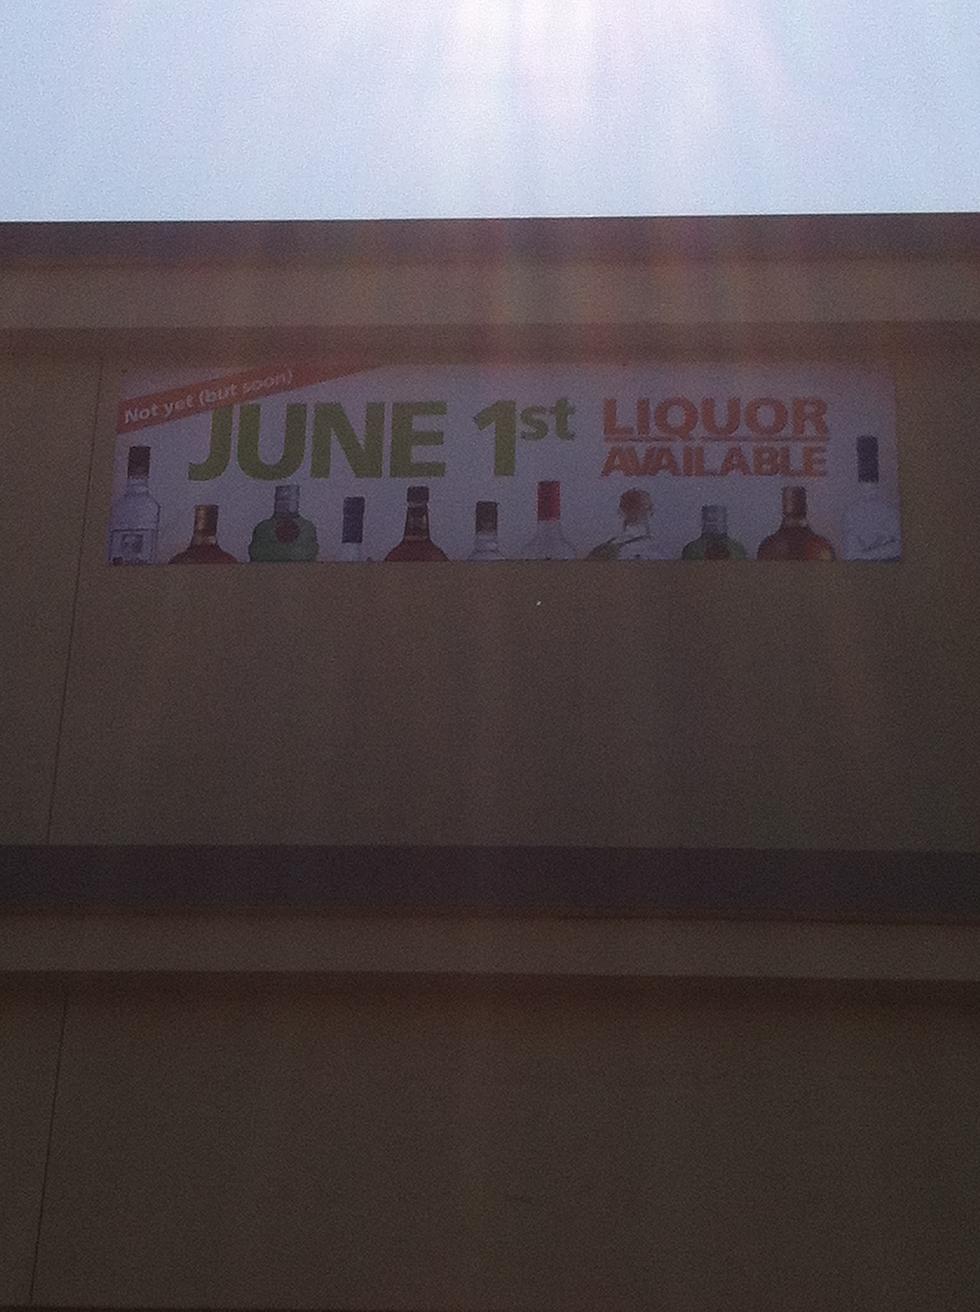 First Sign of Liquor Coming to Grocery Stores